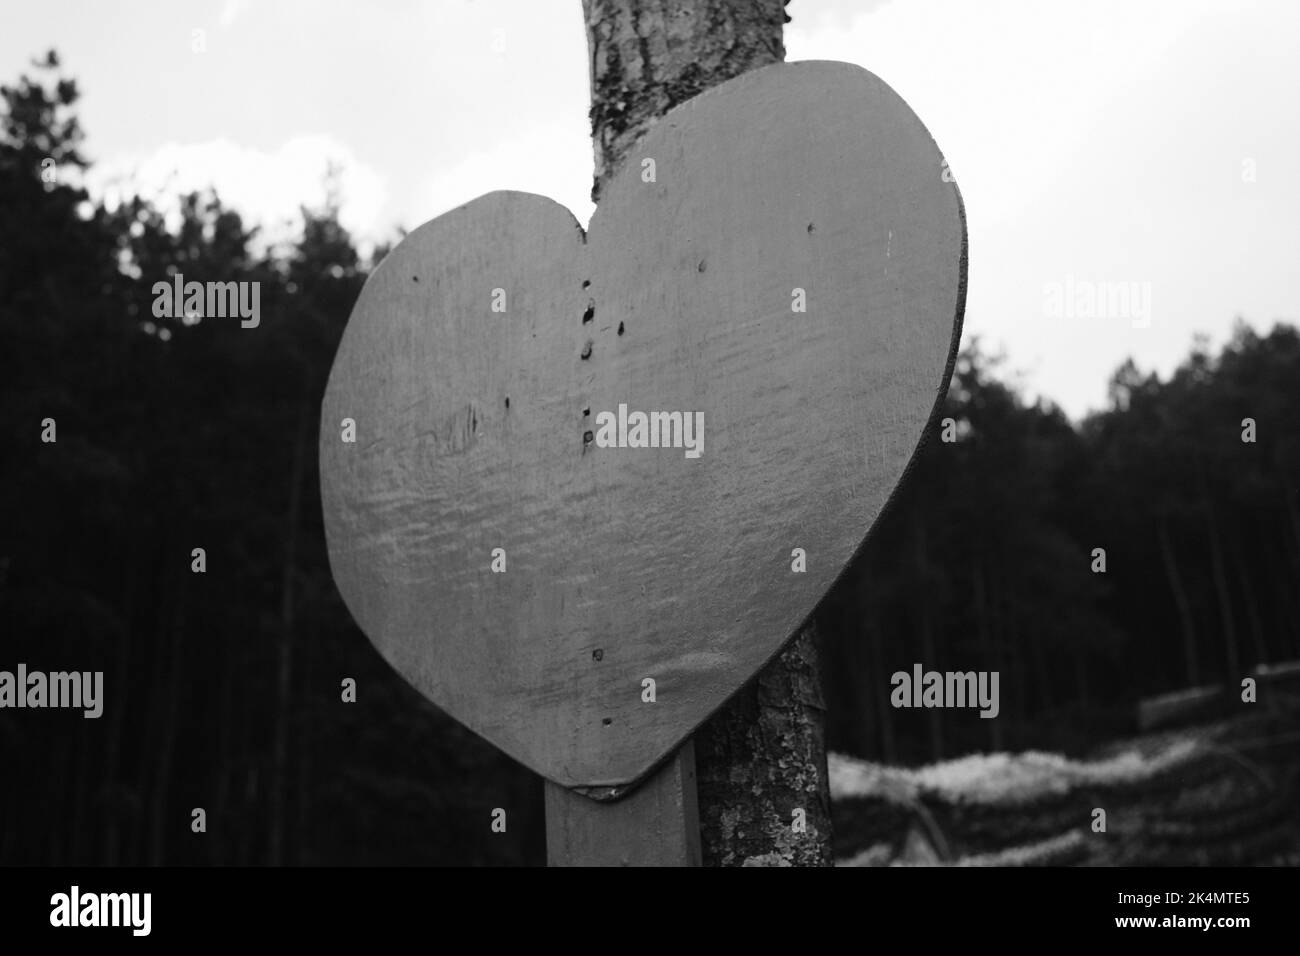 Monochrome photo of a heart-shaped board stuck in a tree in the Cikancung area - Indonesia Stock Photo